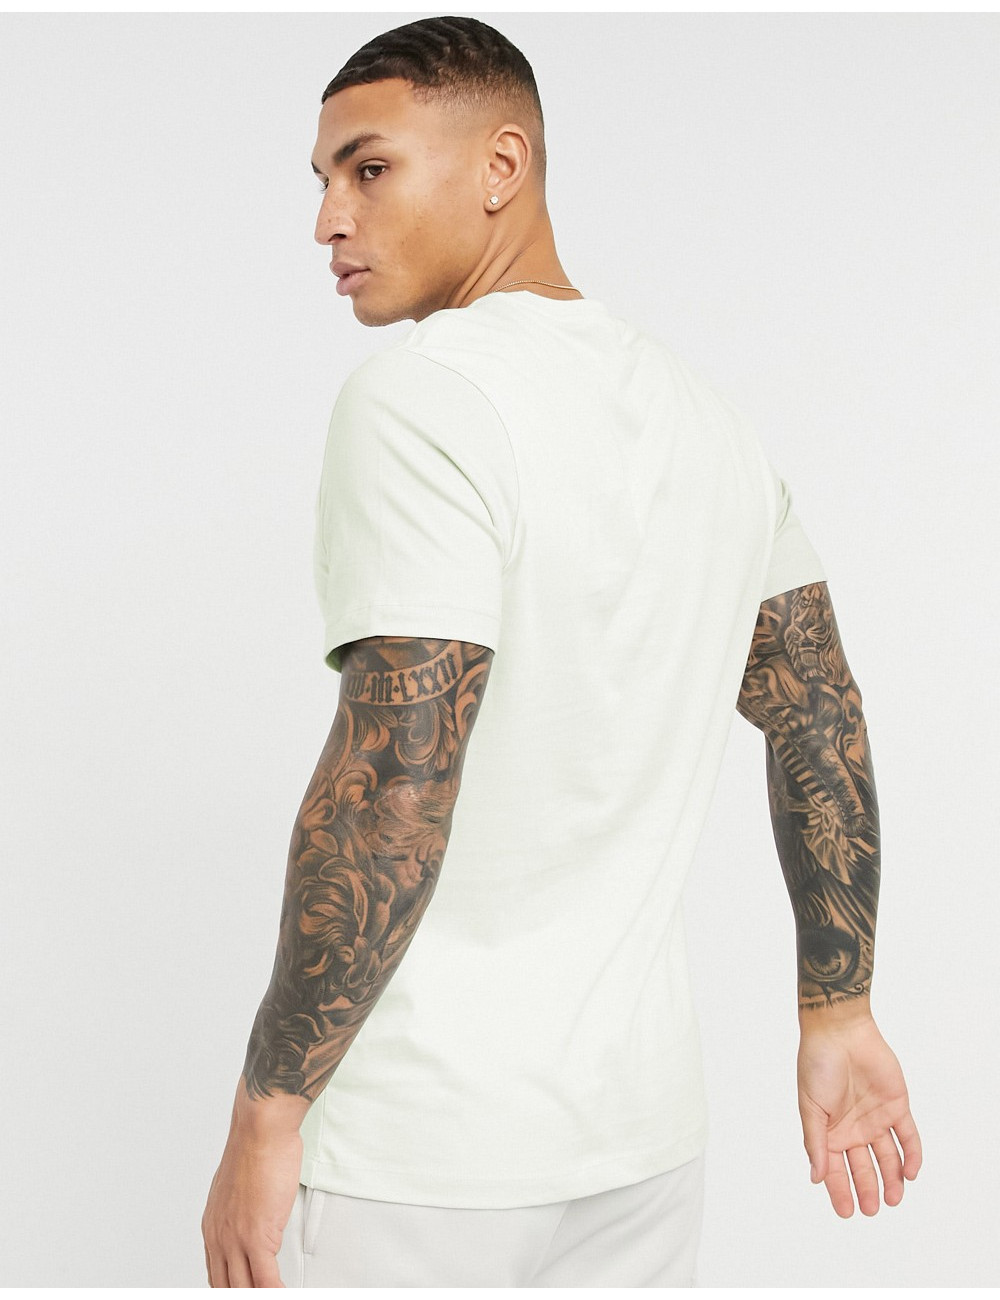 Nike t-shirt in pale...